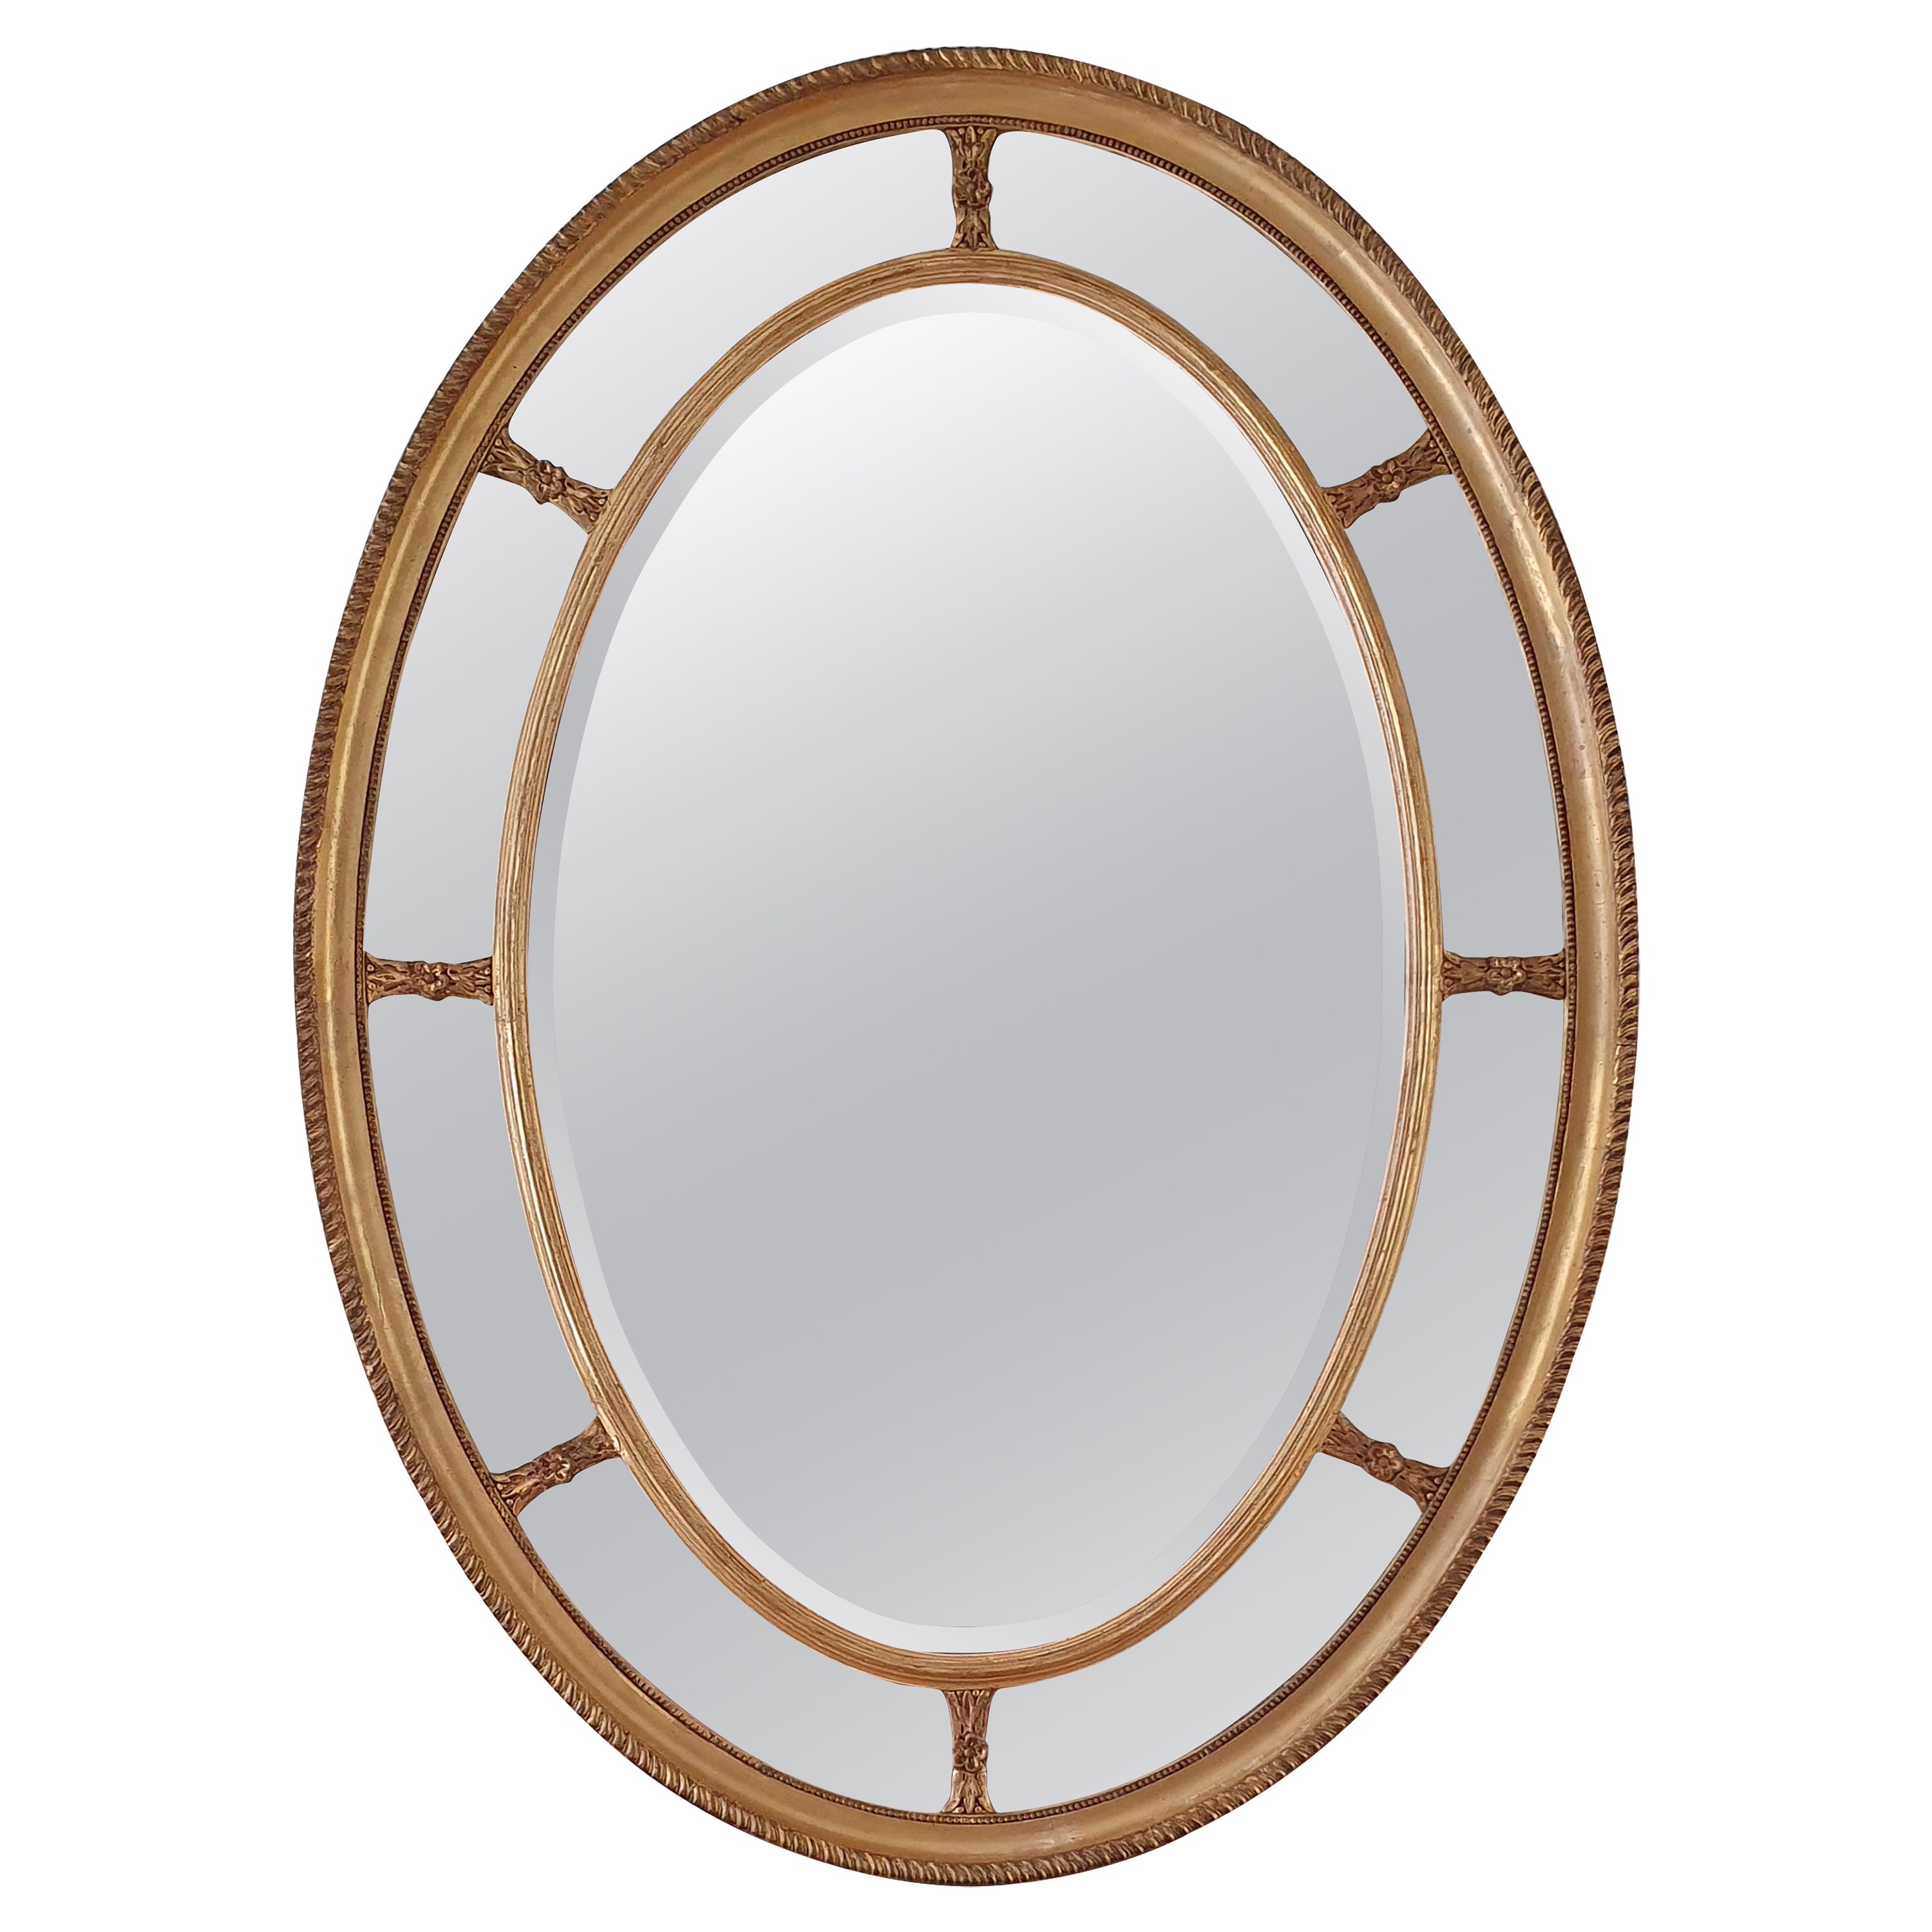 19th century English Adam Style Oval Mirror For Sale